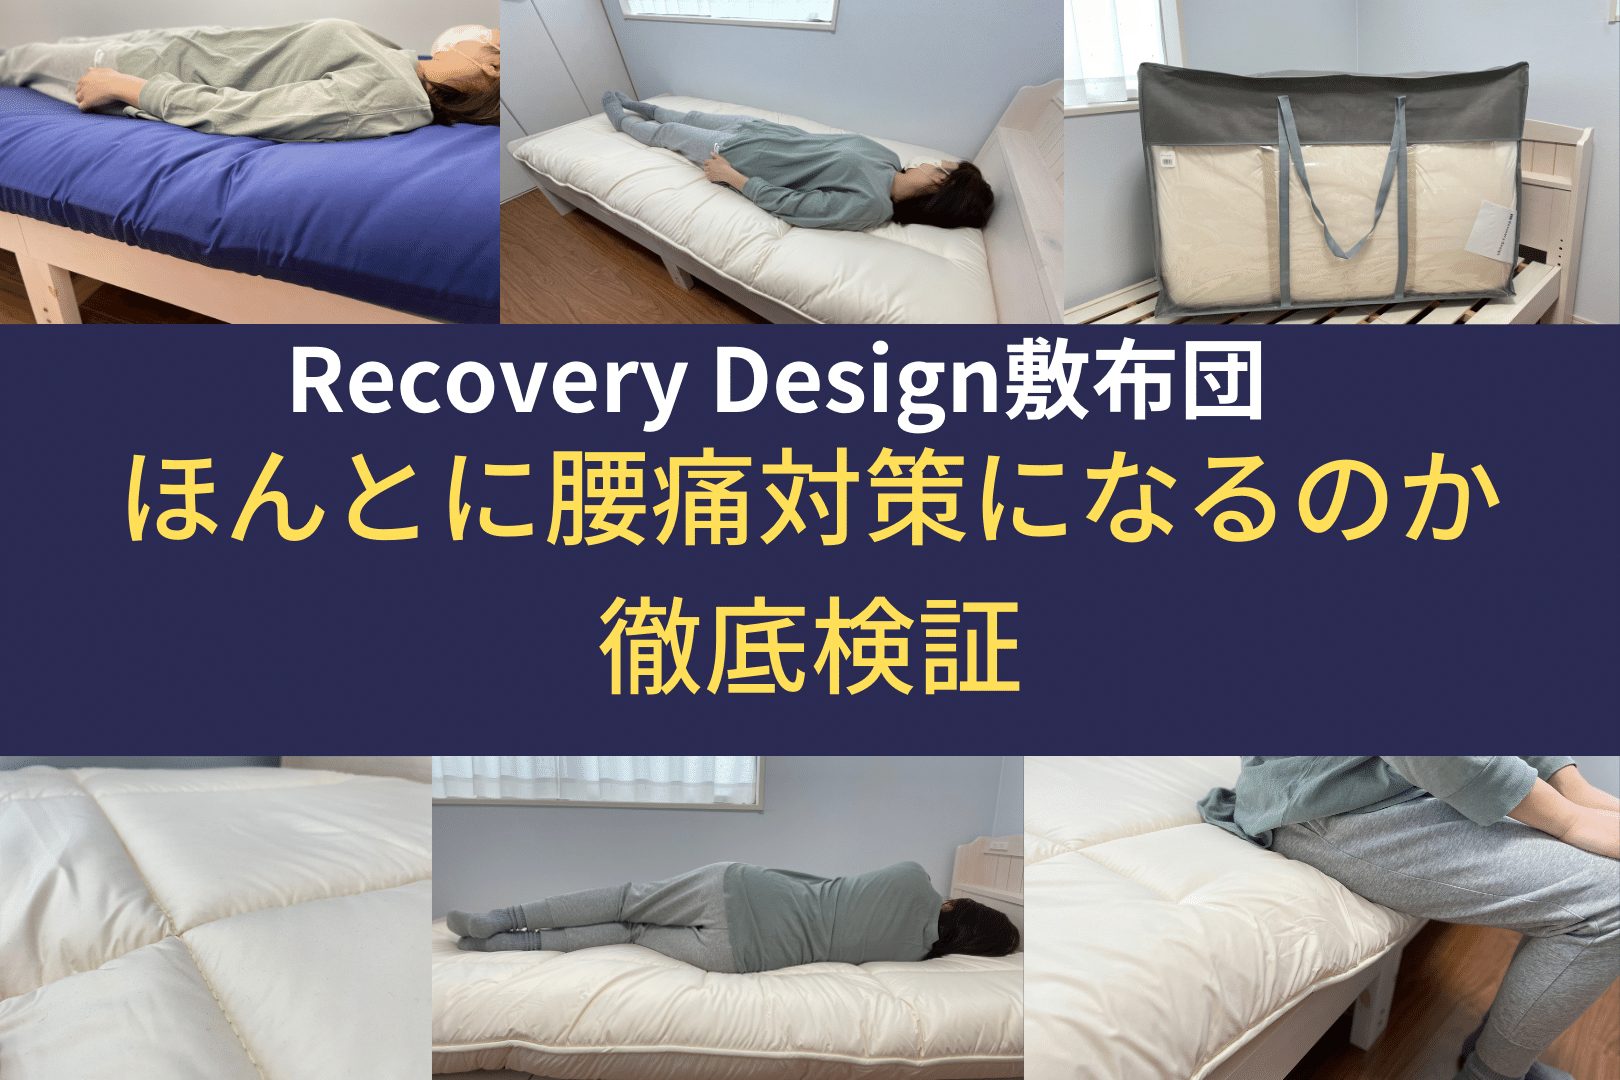 Recovery Design敷布団　レビュー　評判